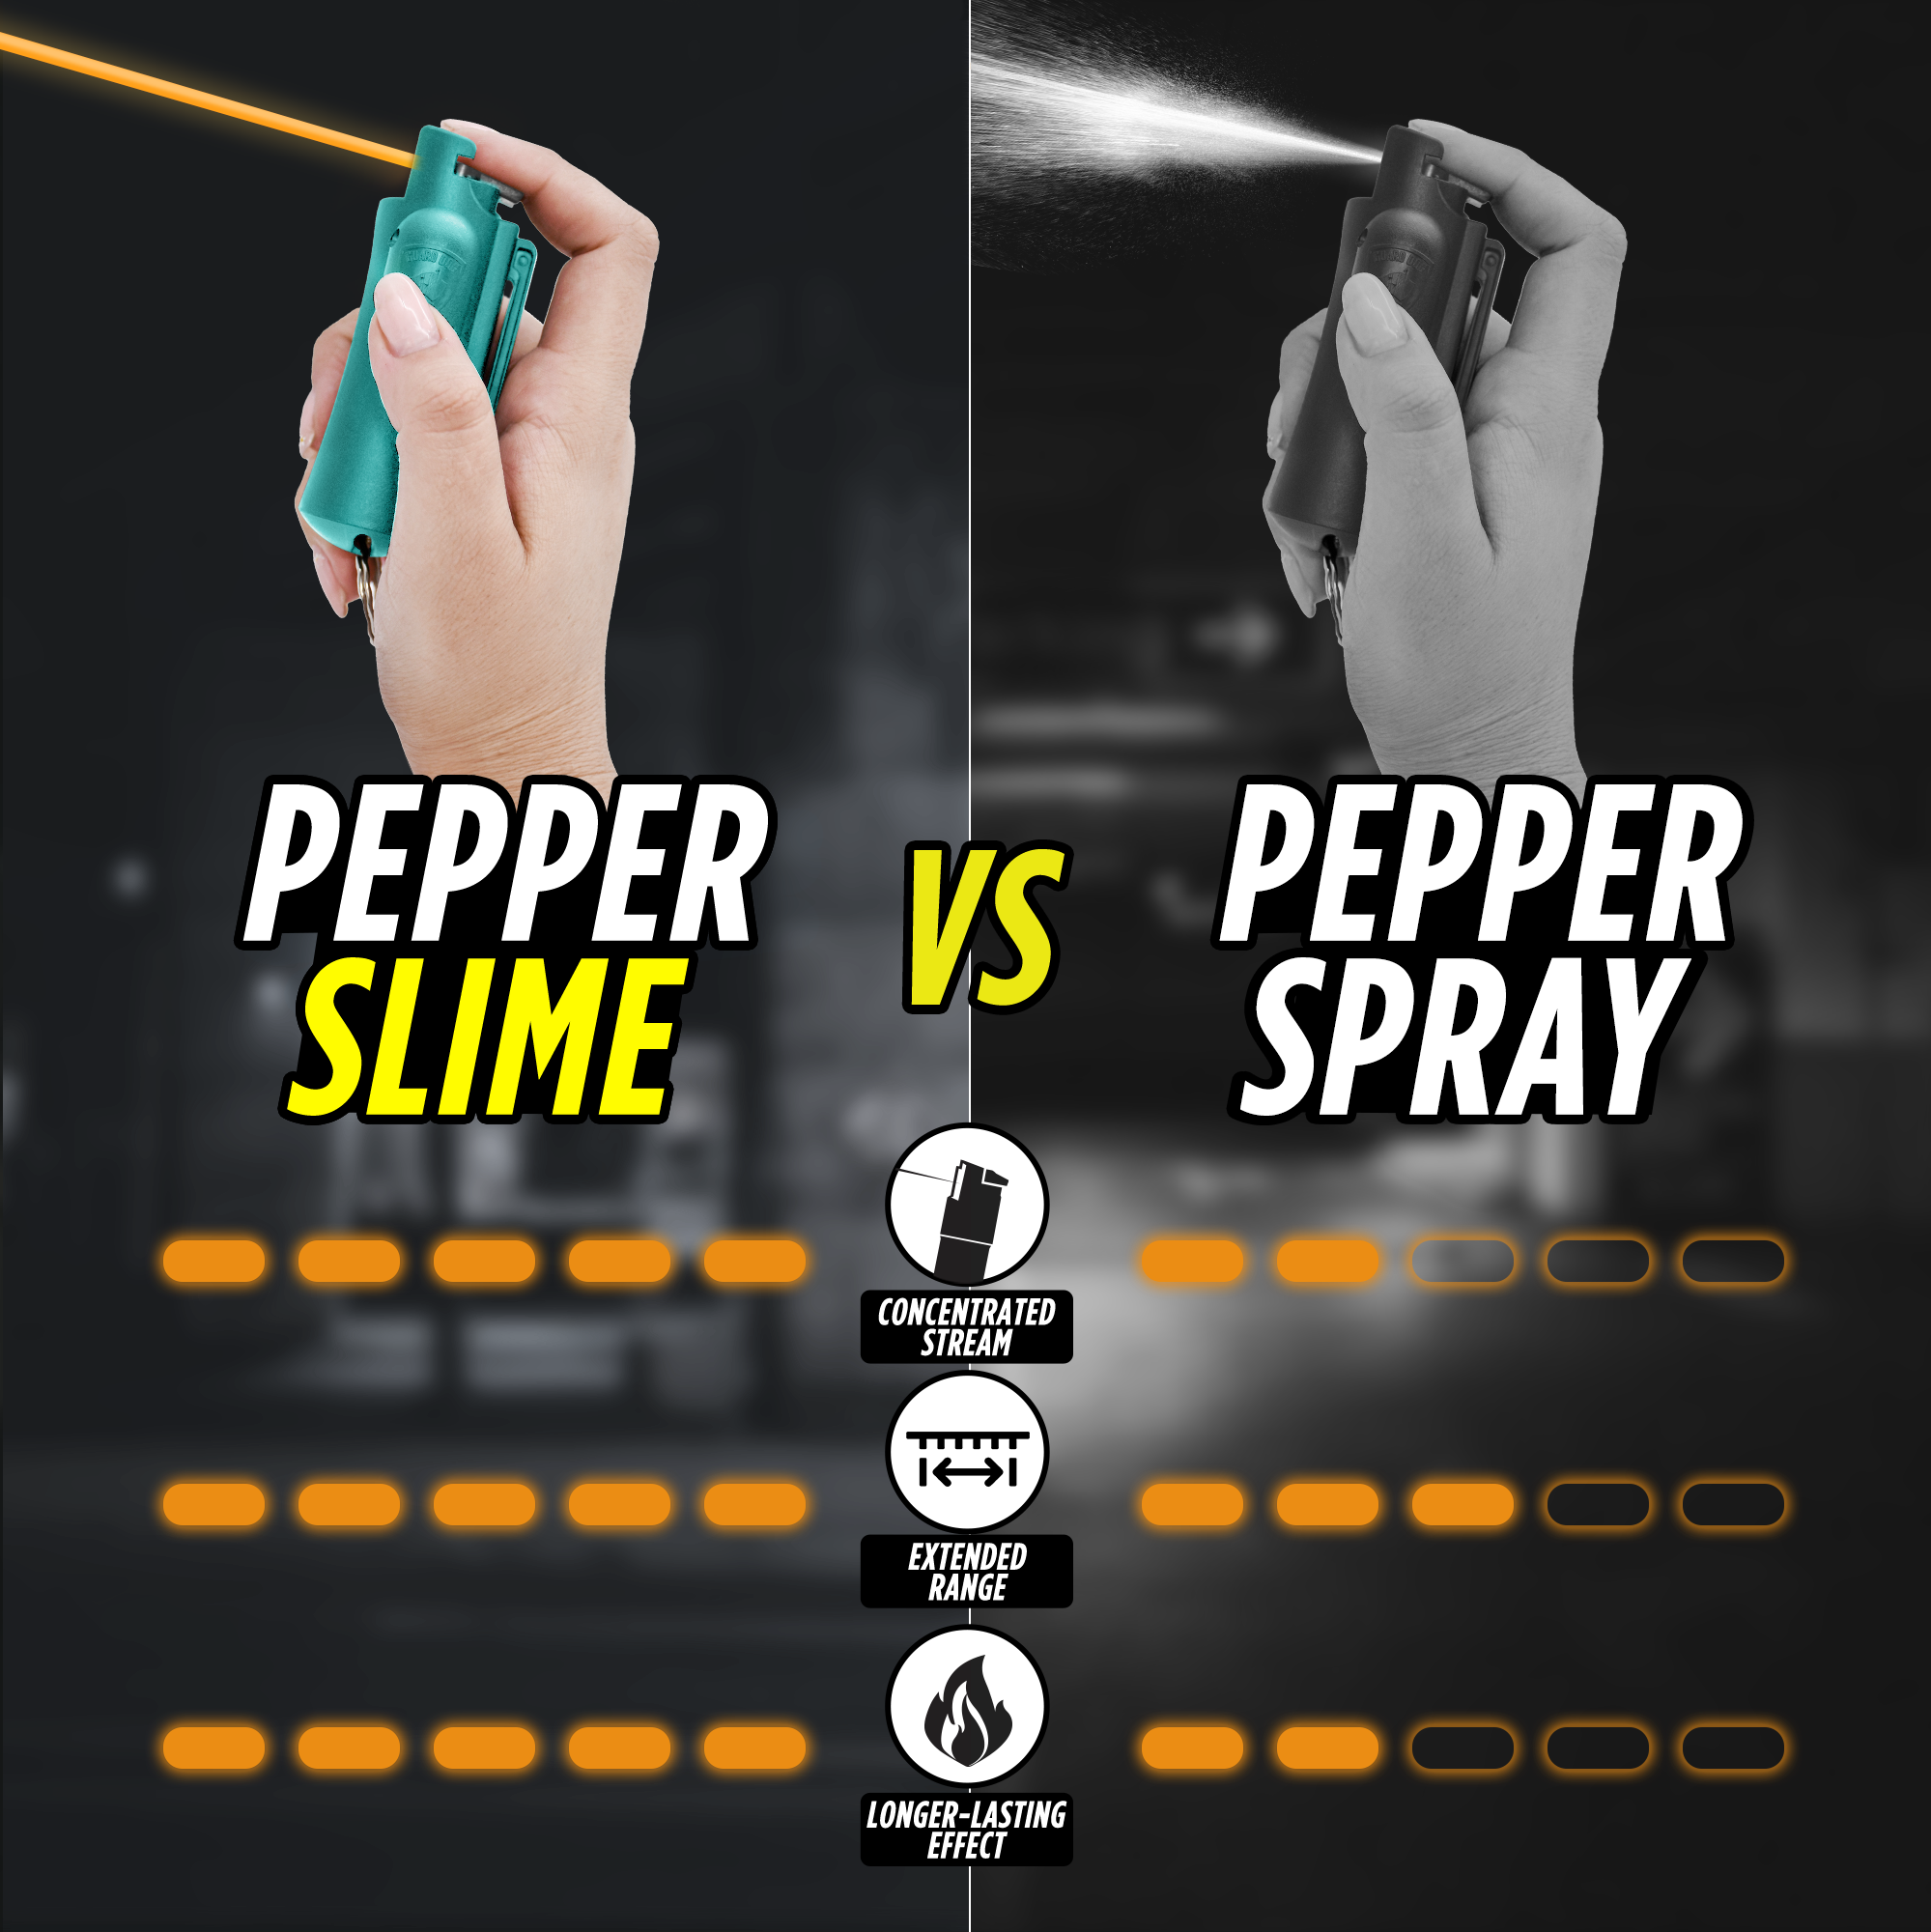 Accufire Pepper Slime - Laser Target Keychain with Belt Clip - The ultimate self-defense tool for both women and men